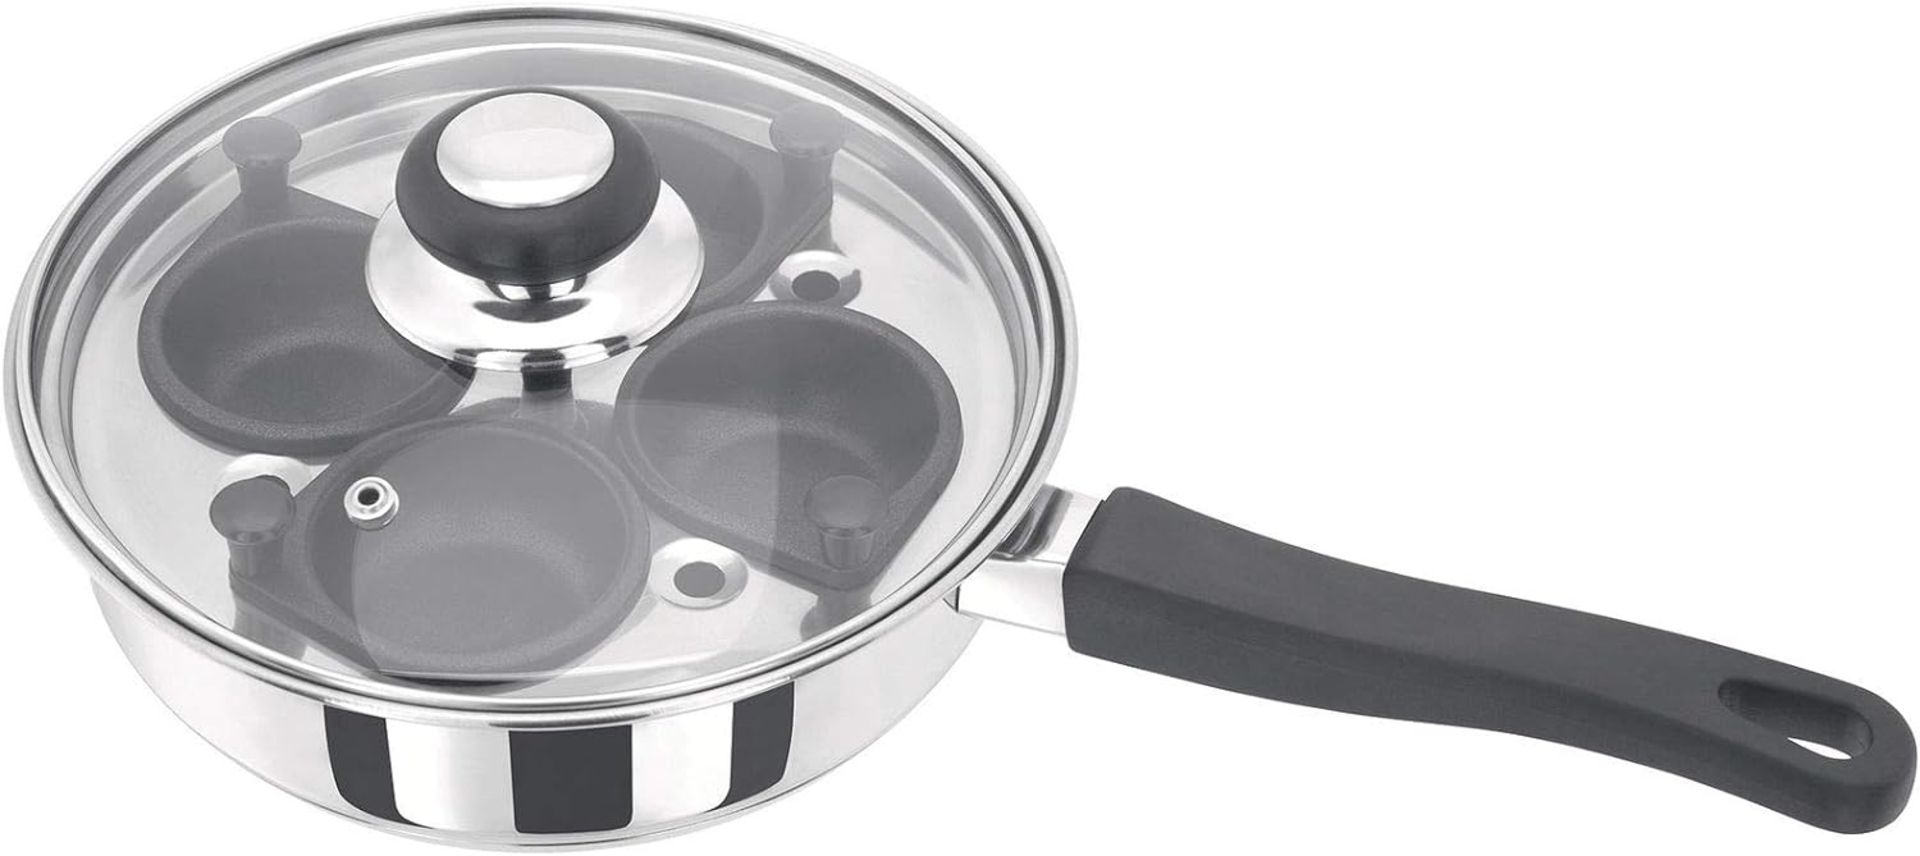 Judge 4 Egg Poacher Pan (Delivery Band A)